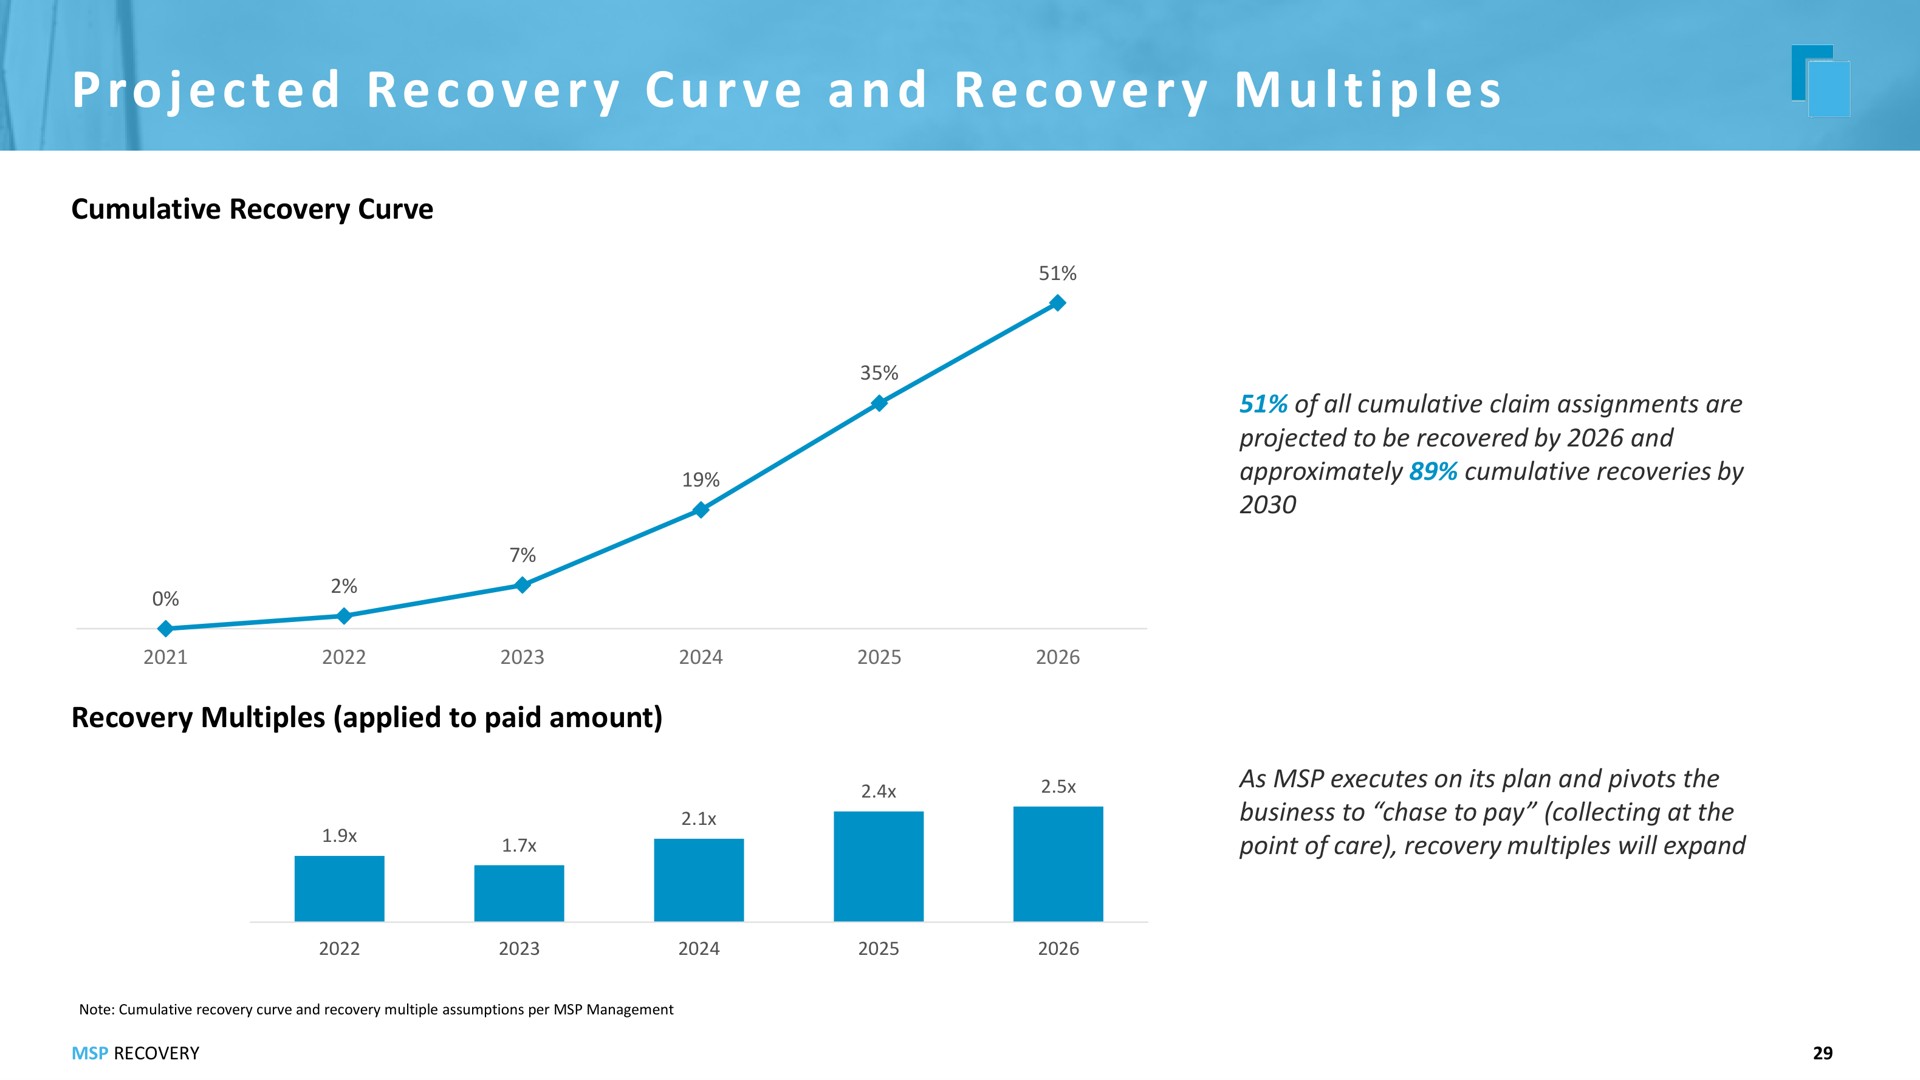 a i projected recovery curve and recovery multiples | MSP Recovery